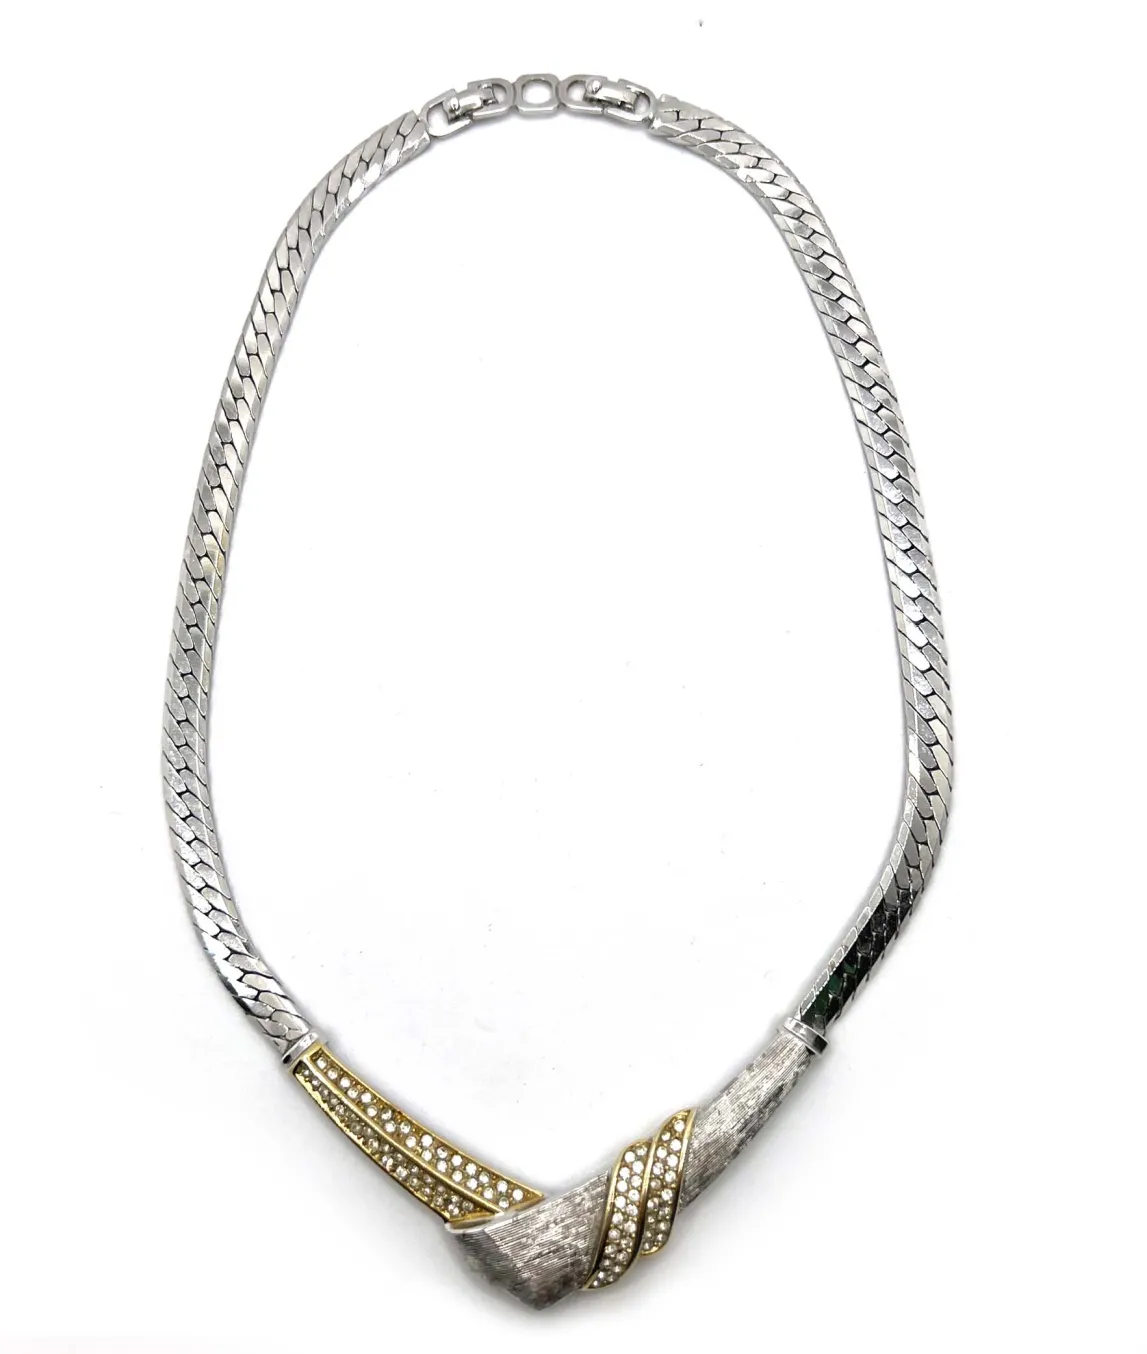 Christian Dior choker necklace silver with gold and rhinestone crystal